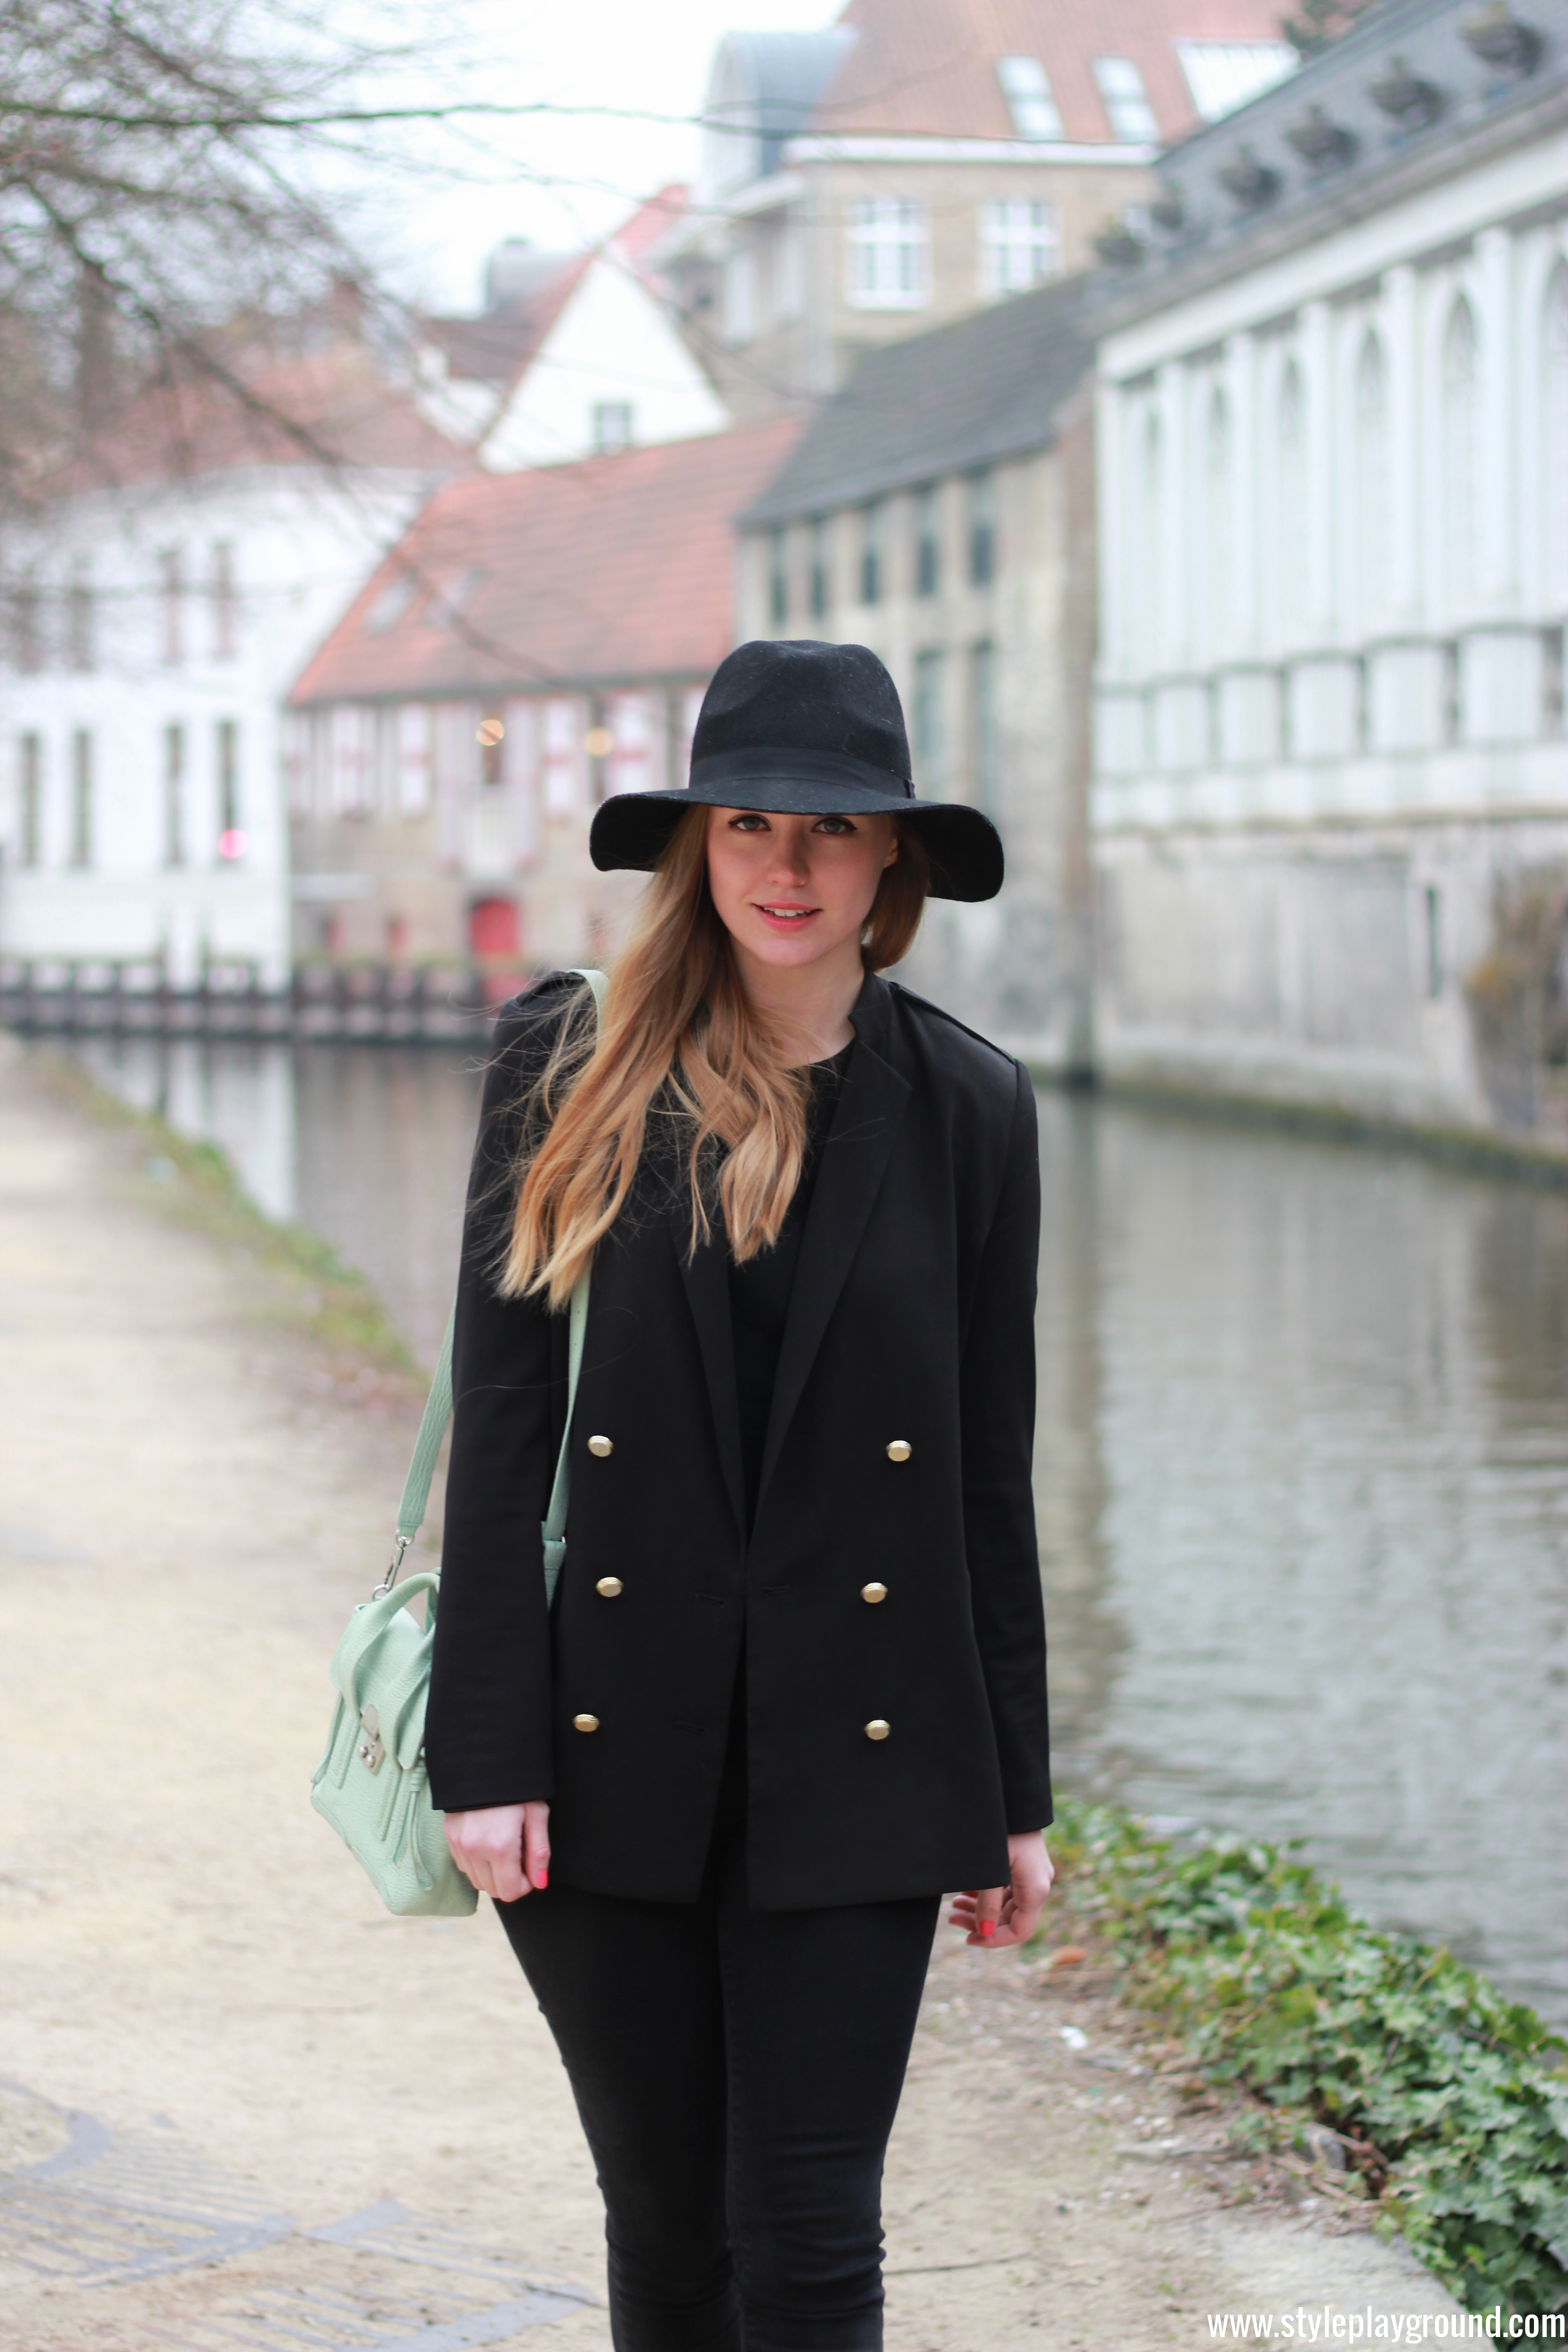 Axelle Blanpain of Style playground is wearing an H&M blazer & hat, Mango jumper, J Brand jeans, Repetto loafers & 3.1 Phillip Lim bag